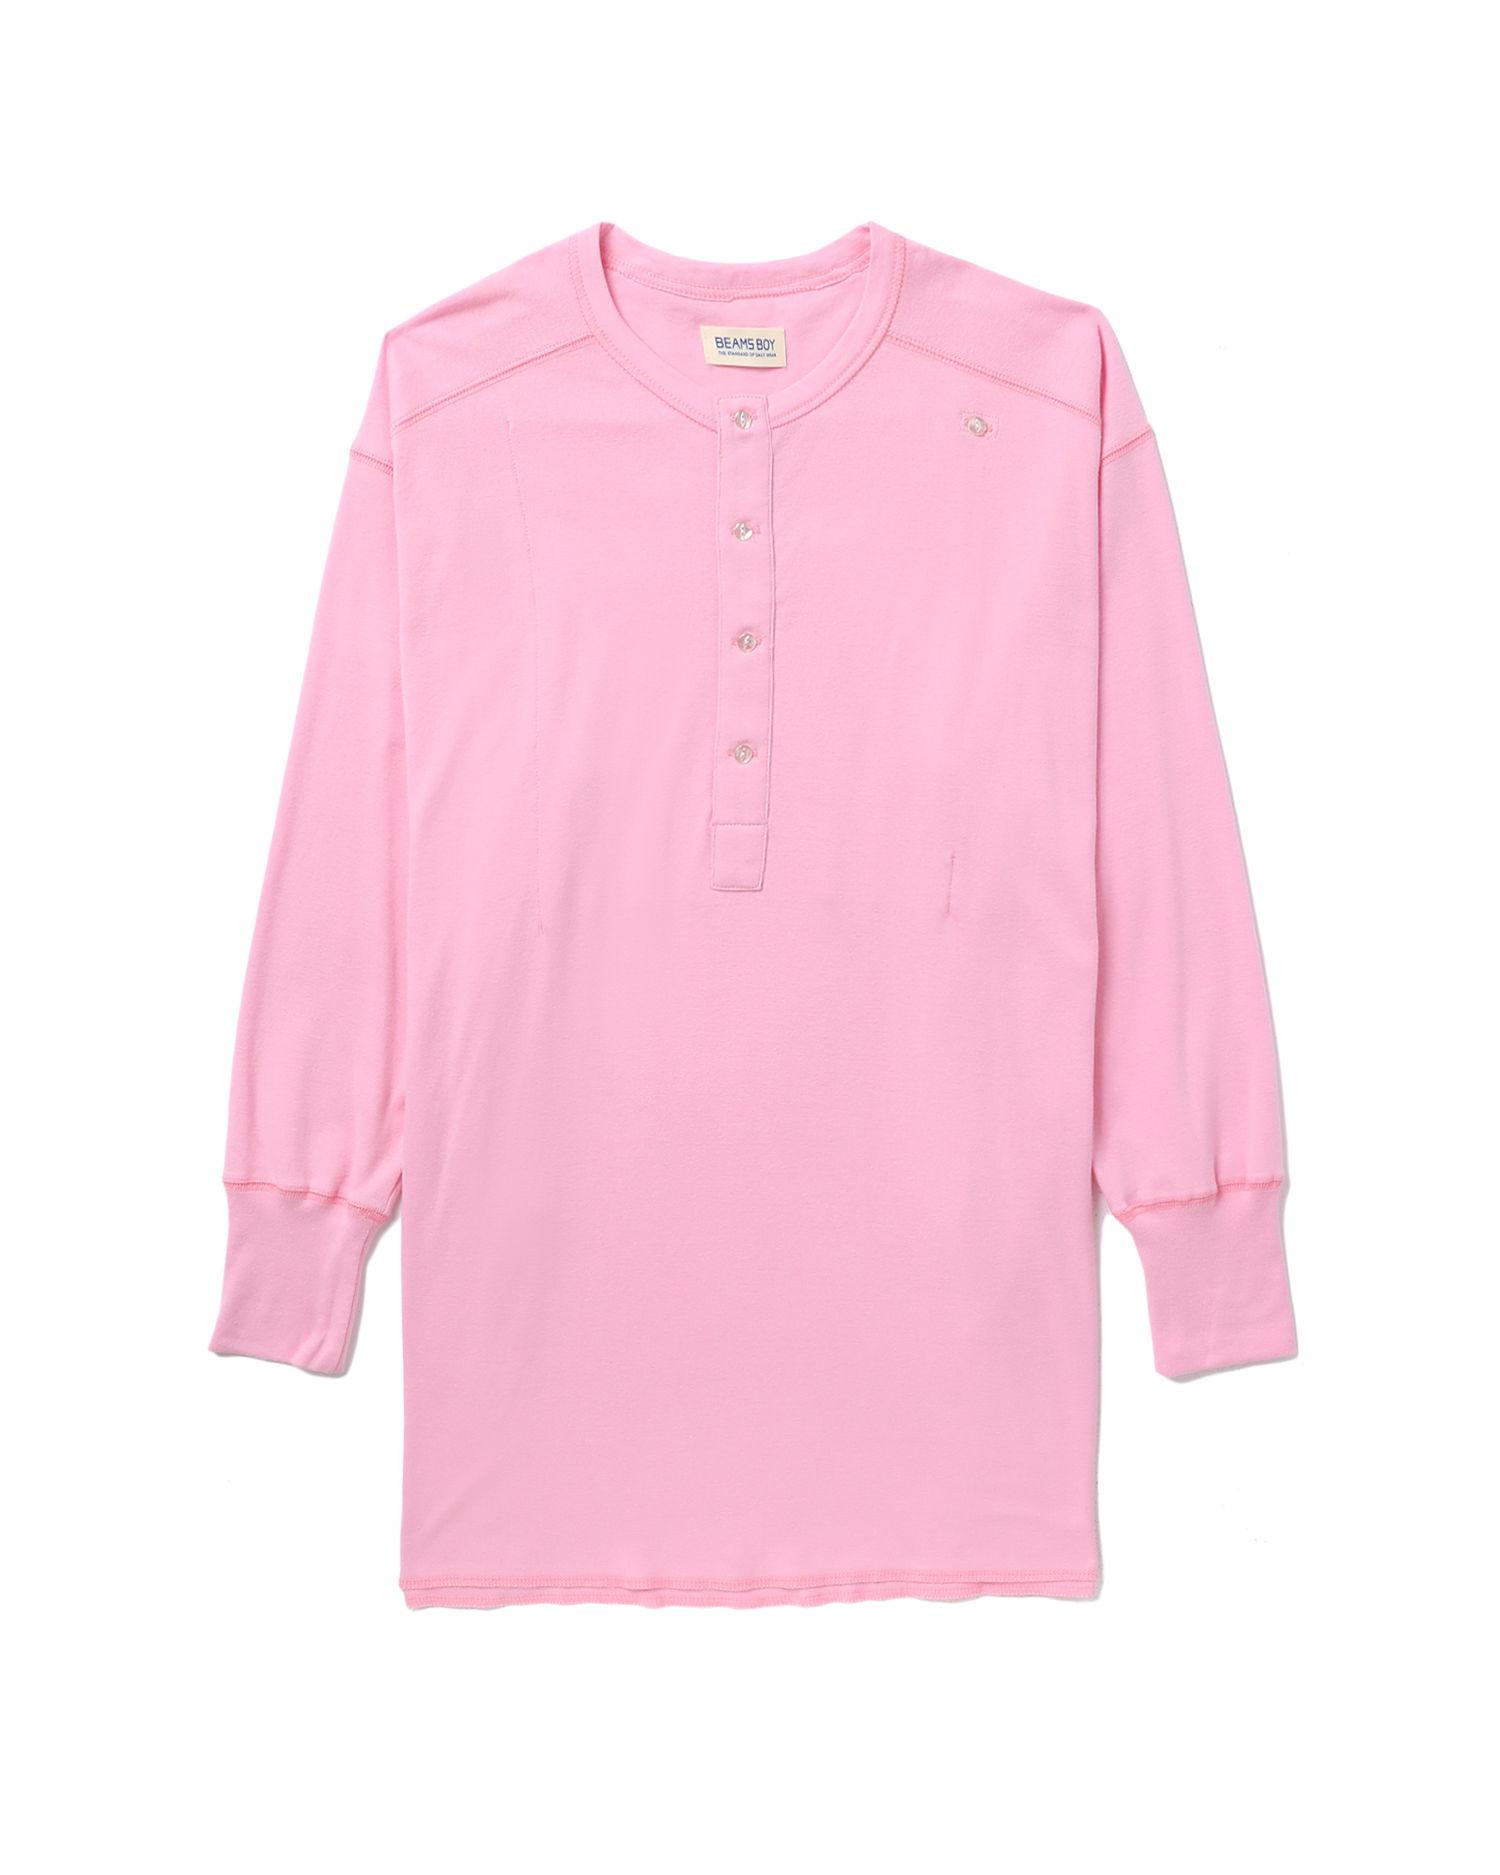 Buttoned tee by BEAMS BOY